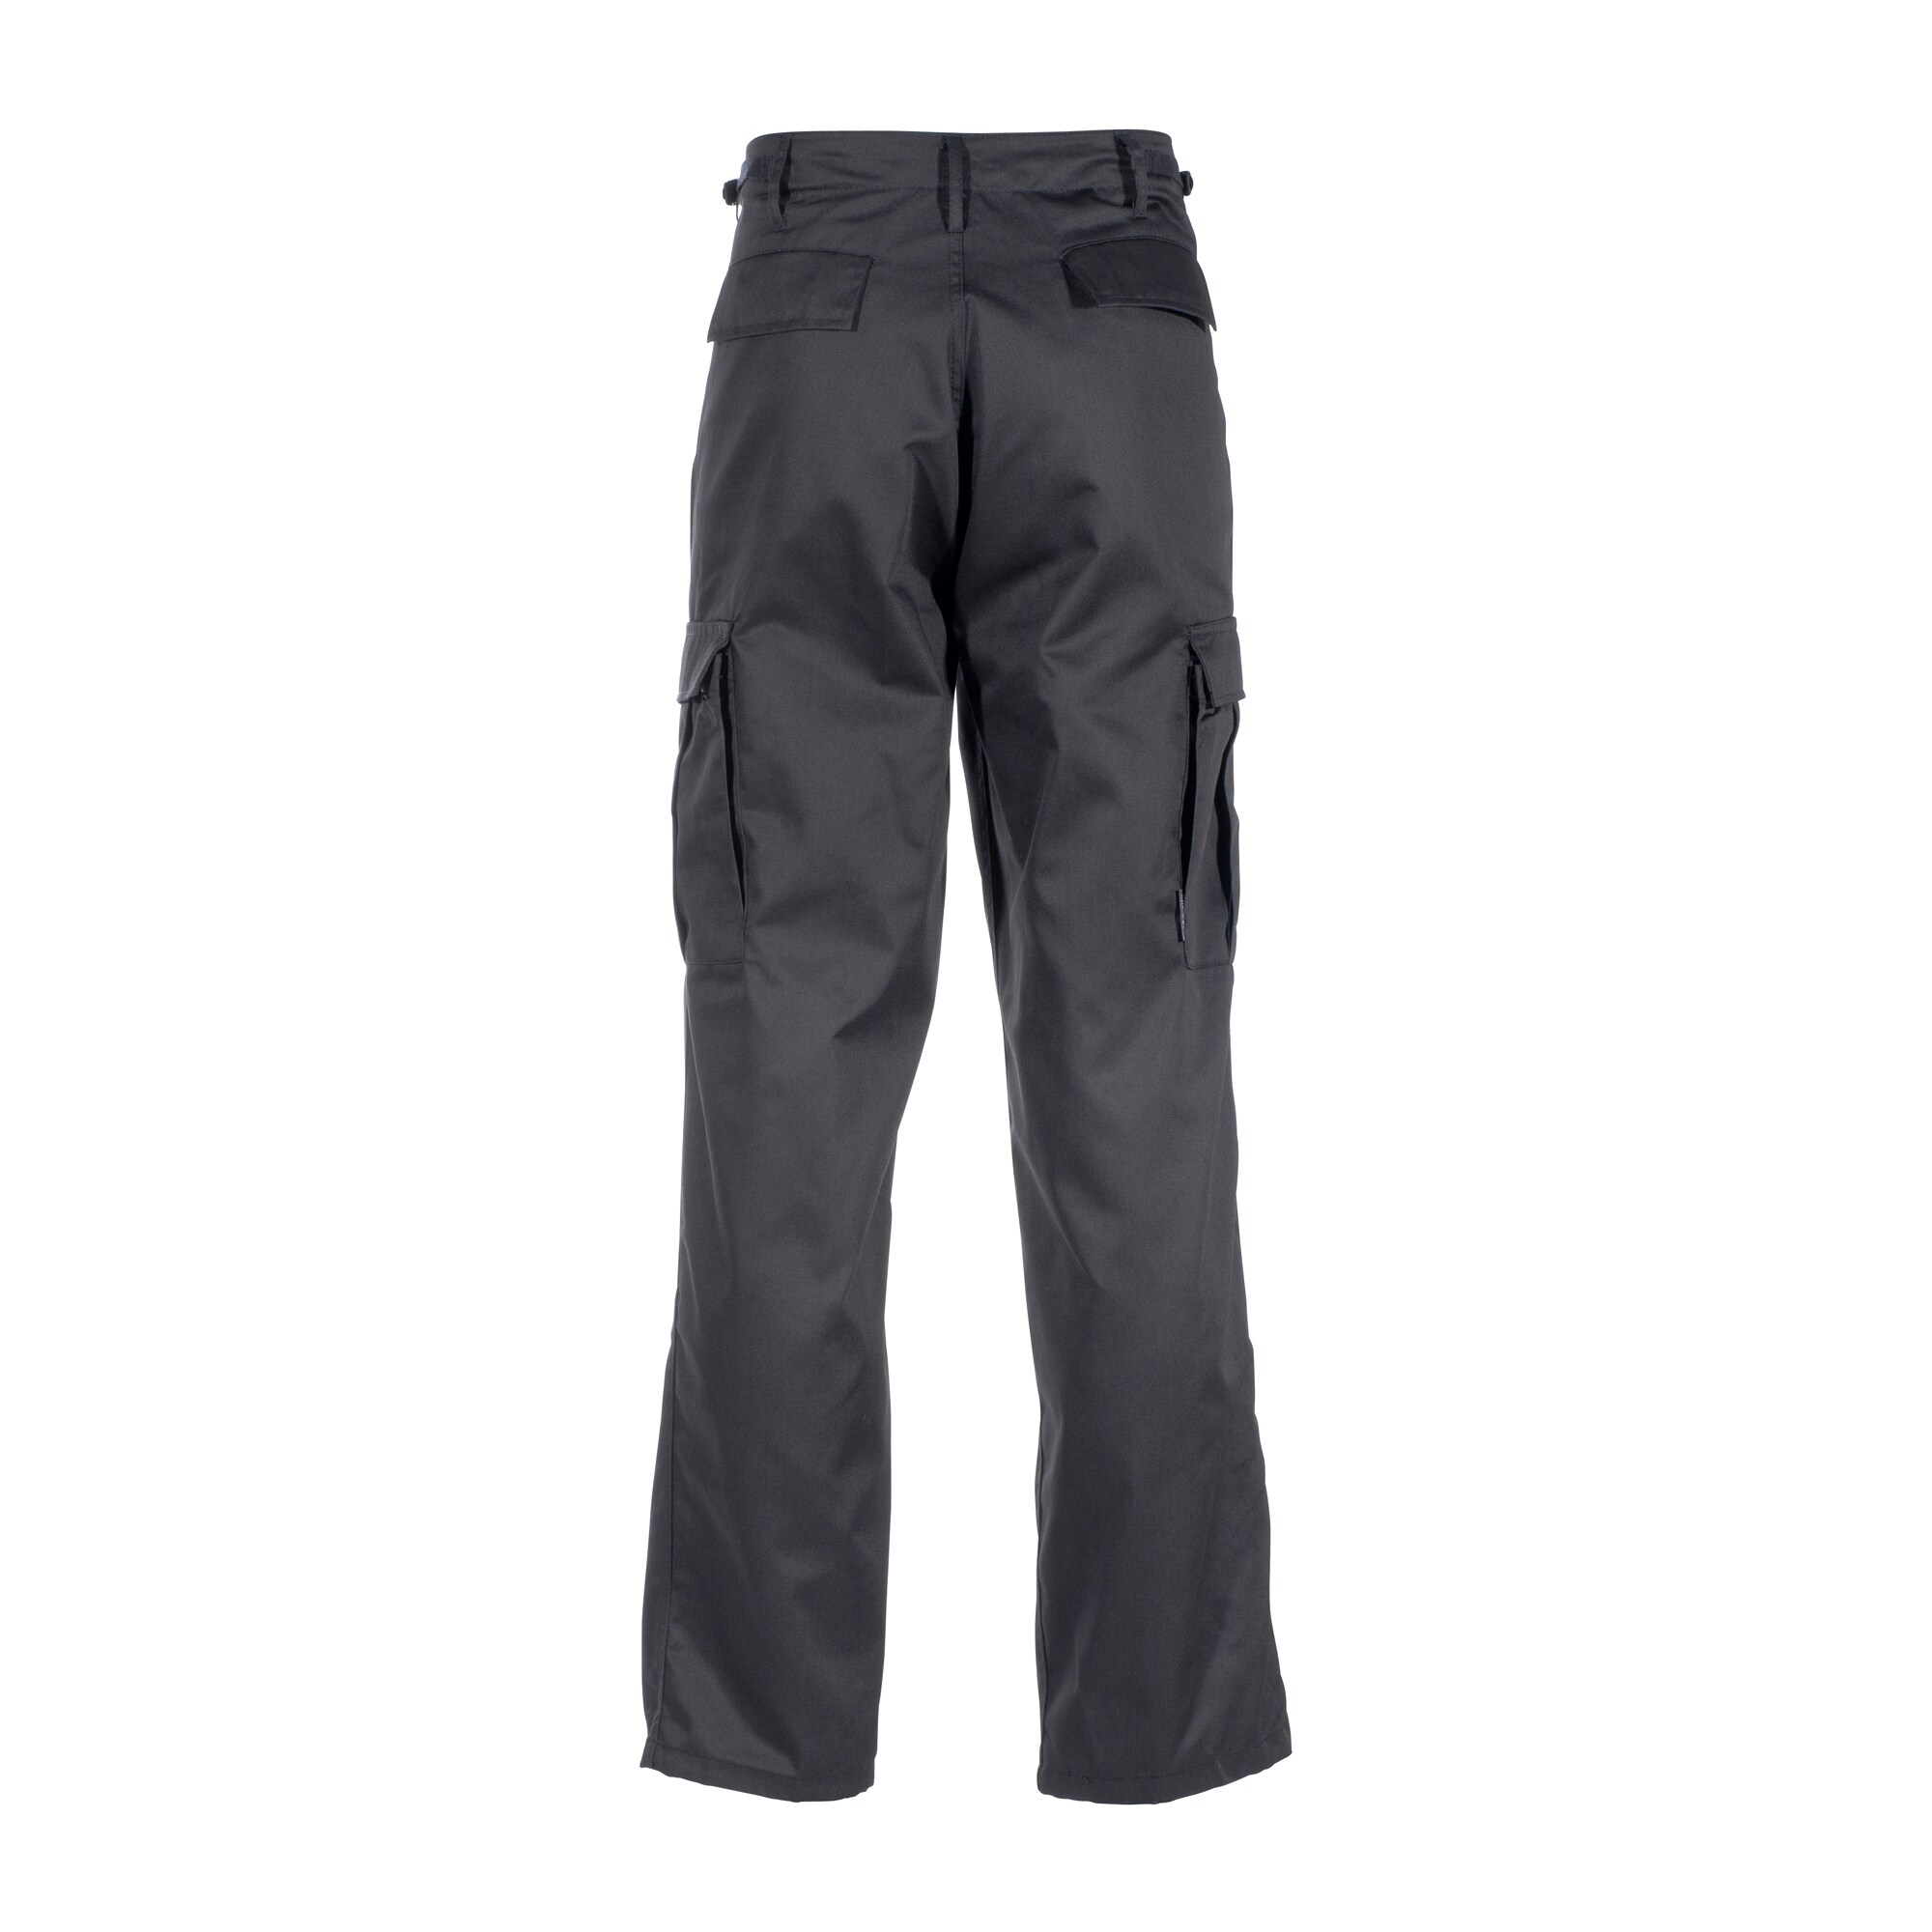 Purchase the Ranger Pants black by ASMC